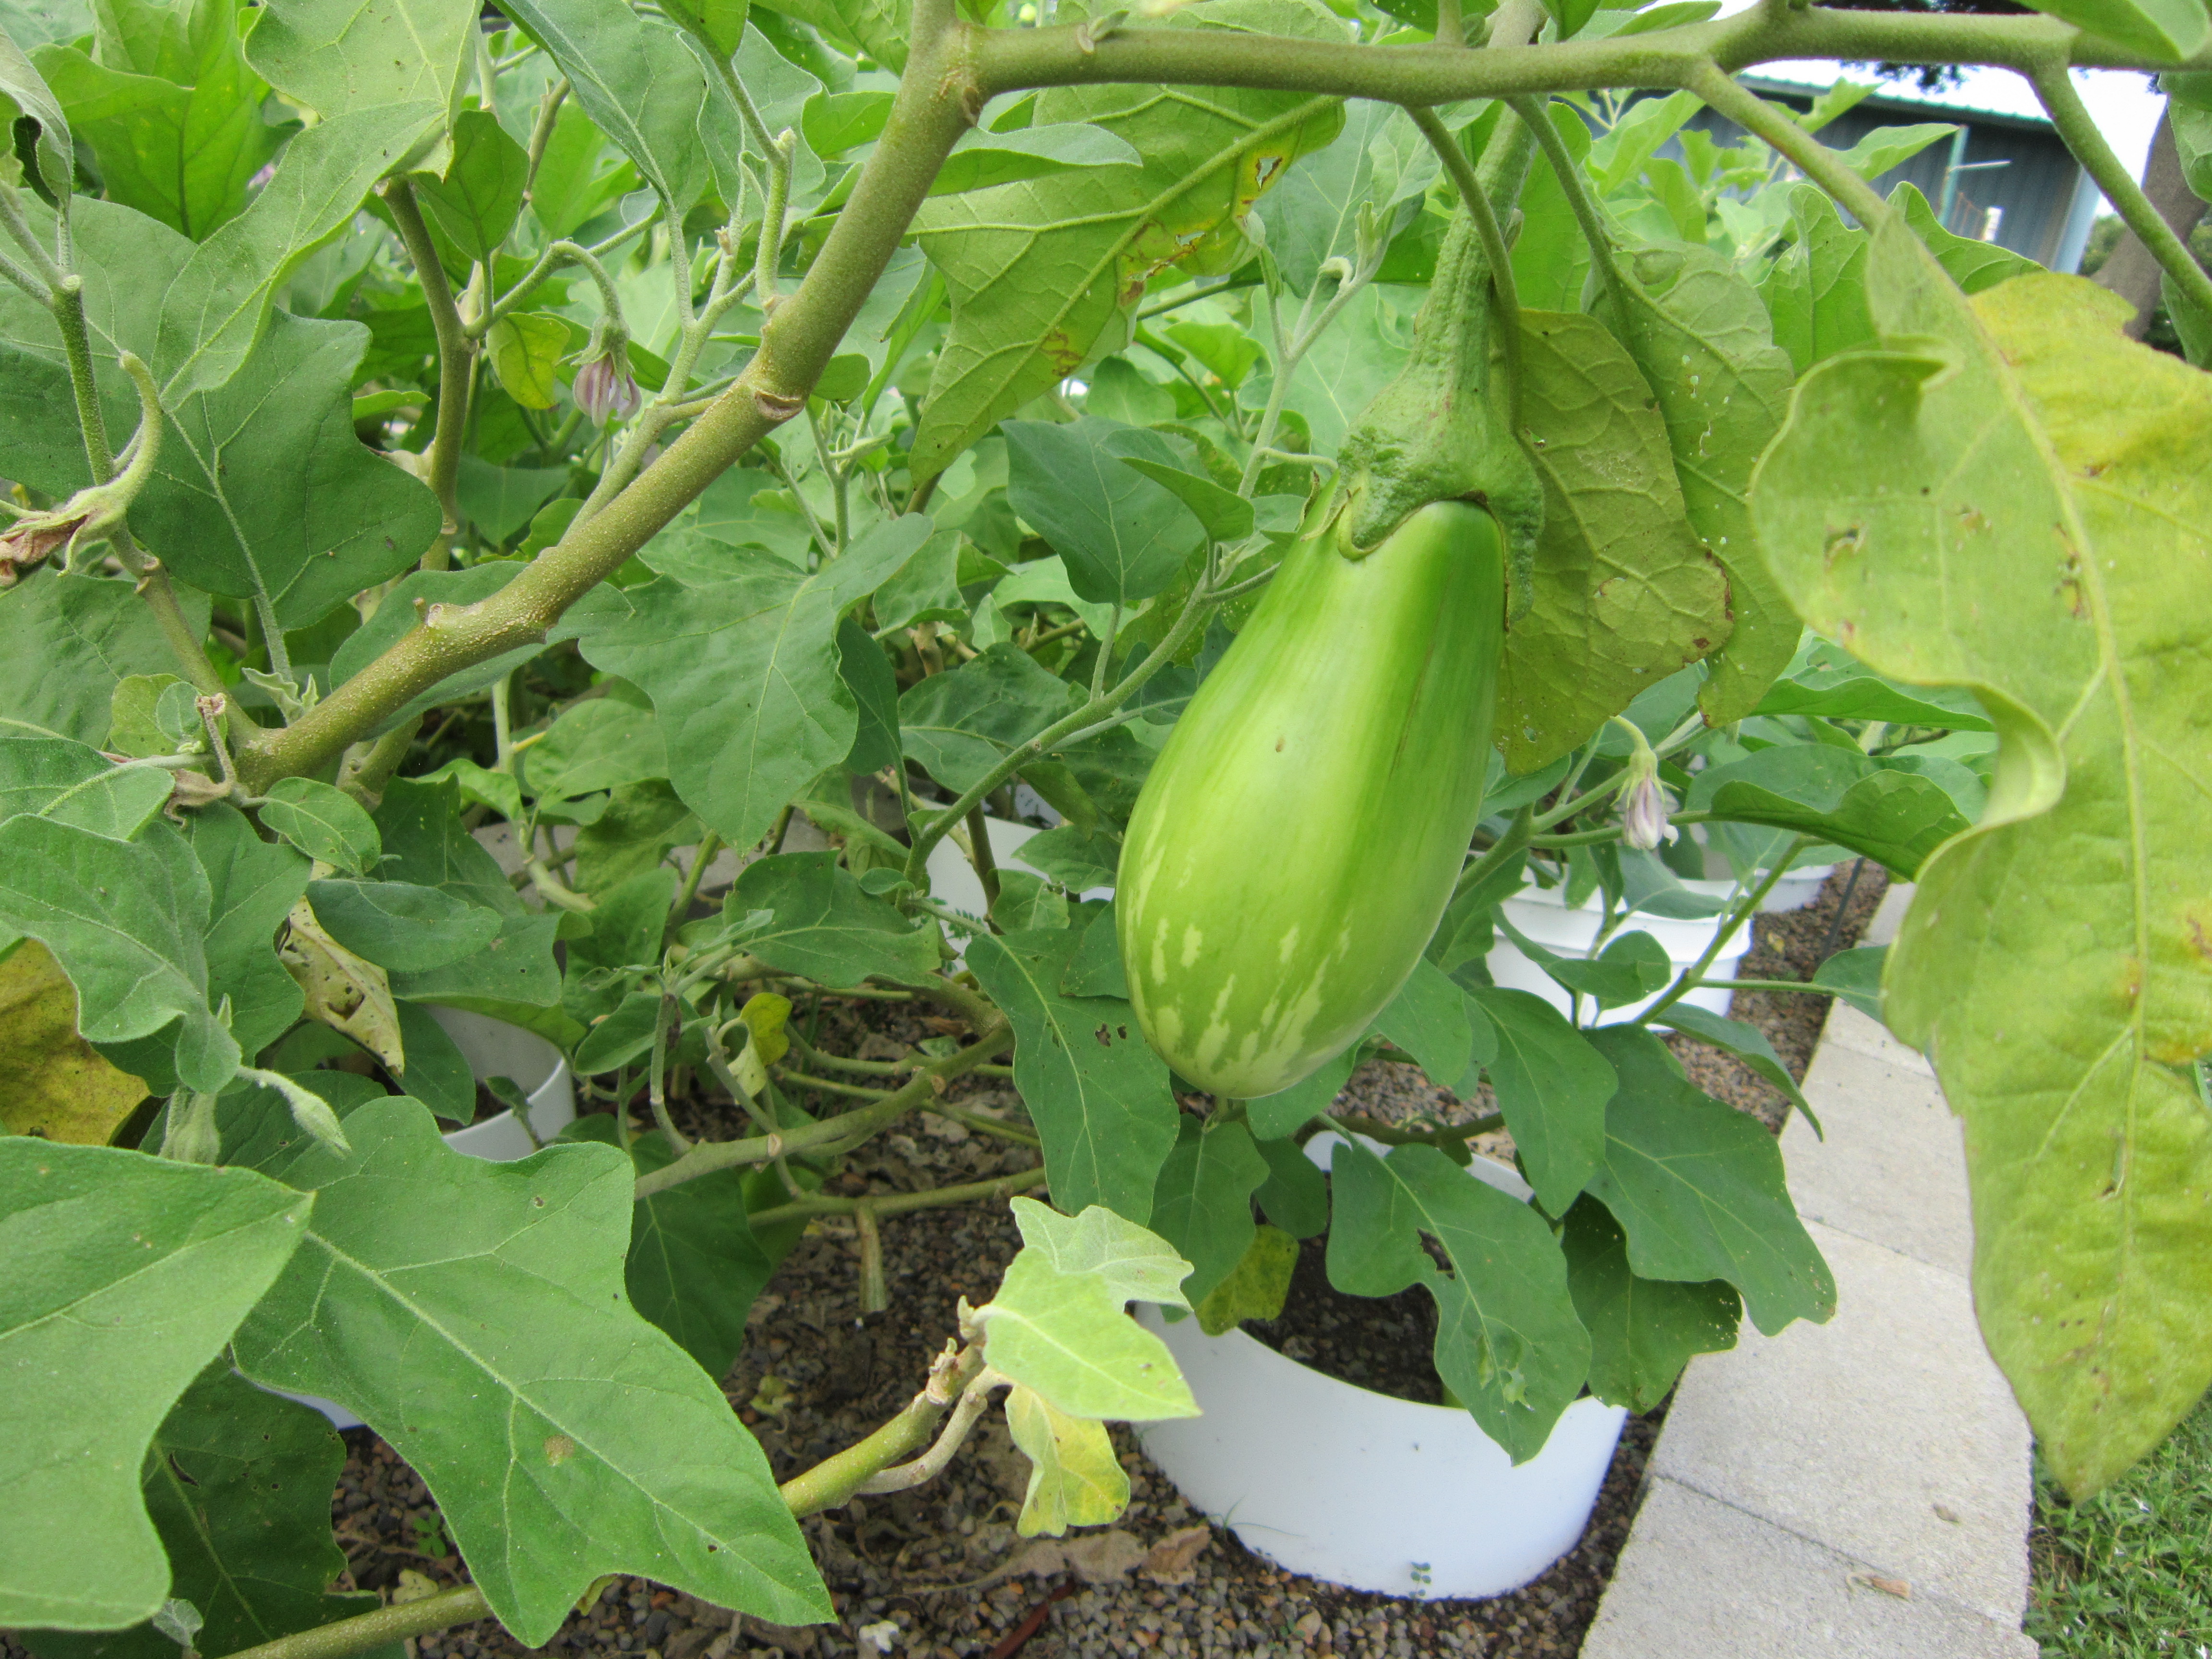 These eggplants stay green, and do not turn purple. 